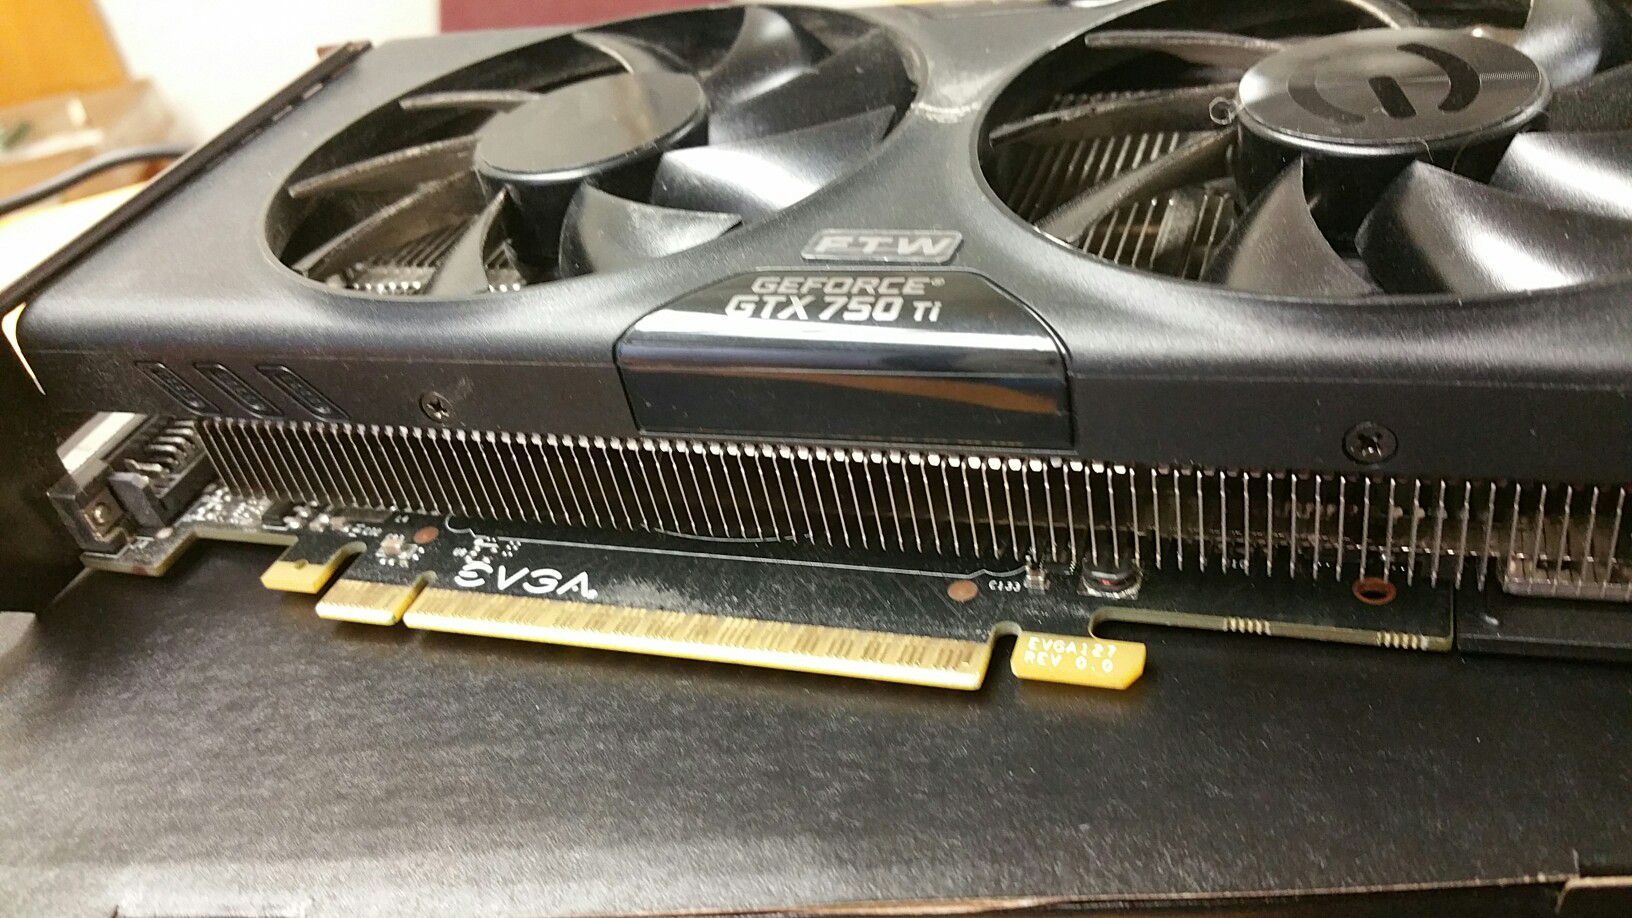 Video Cards: For graphics or gaming: GTX 750 ti, 2GB ram, works great as new, still with the original black box